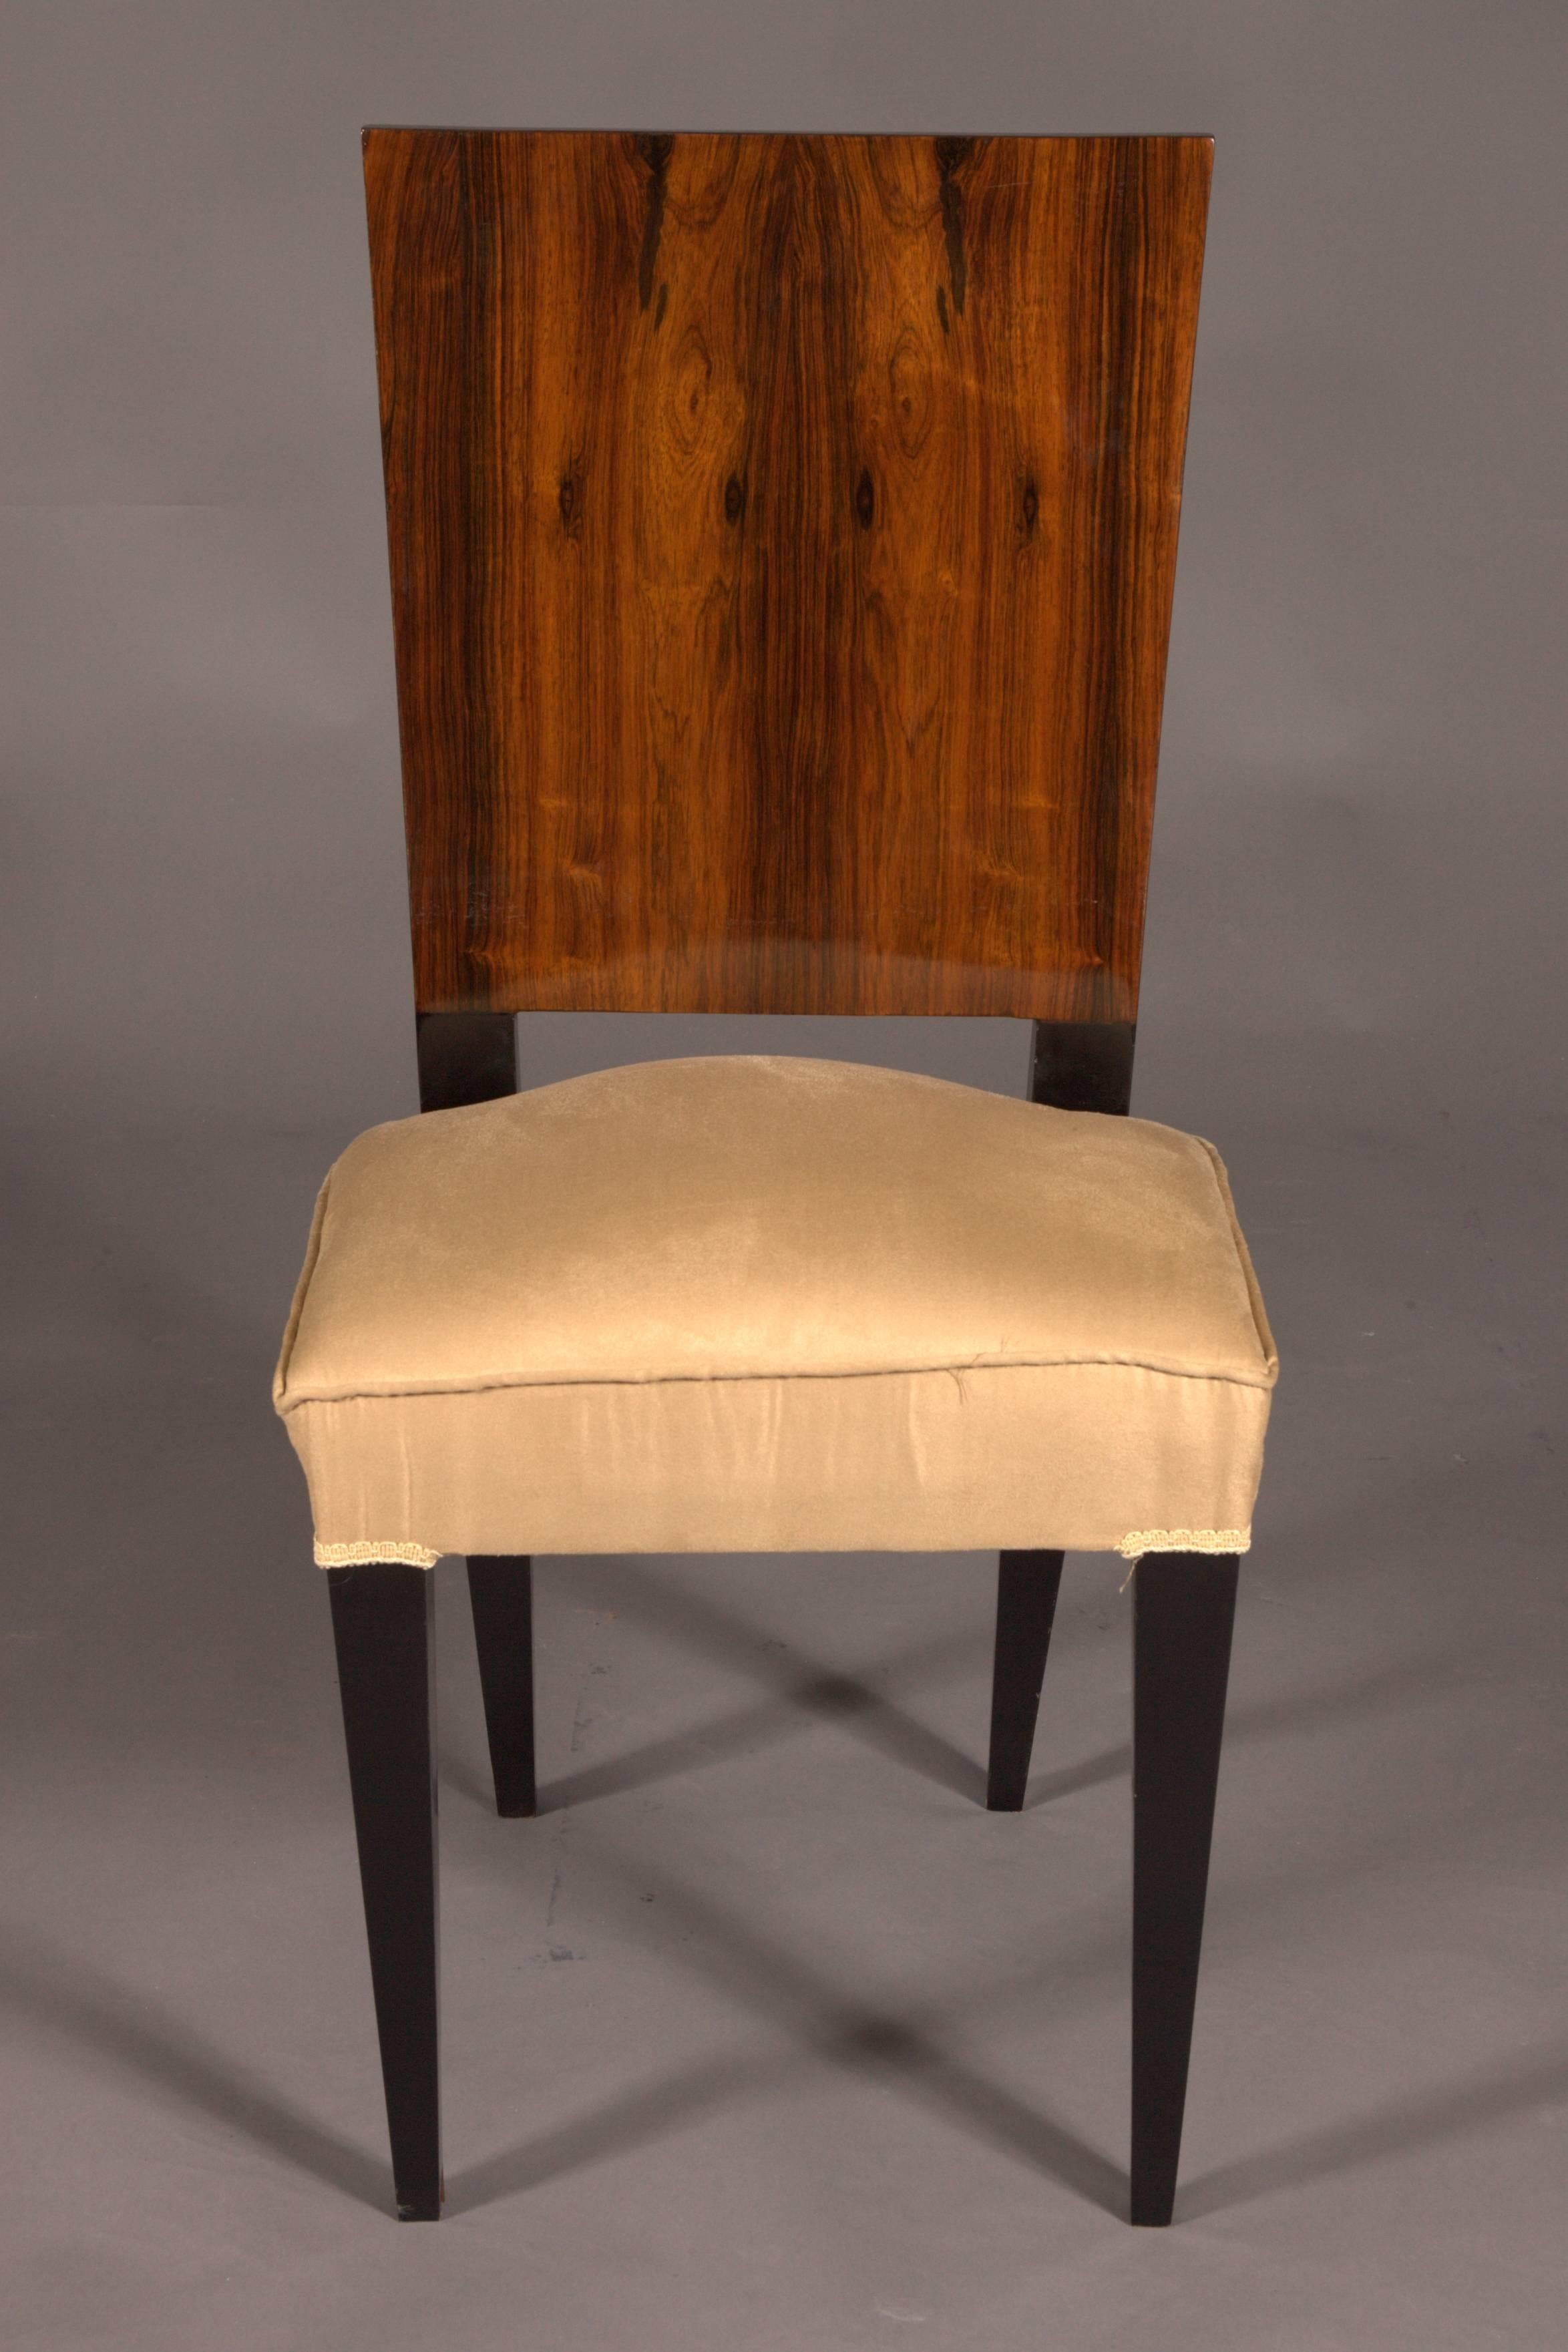 Massive beechwood with exotic Indian rosewood veneer.
Straight frame on tapering squares. High-rectangular, shoulder-shaped backrest frames. Seat surface upholstered and covered.  

Made exactly according to our original (from the time).